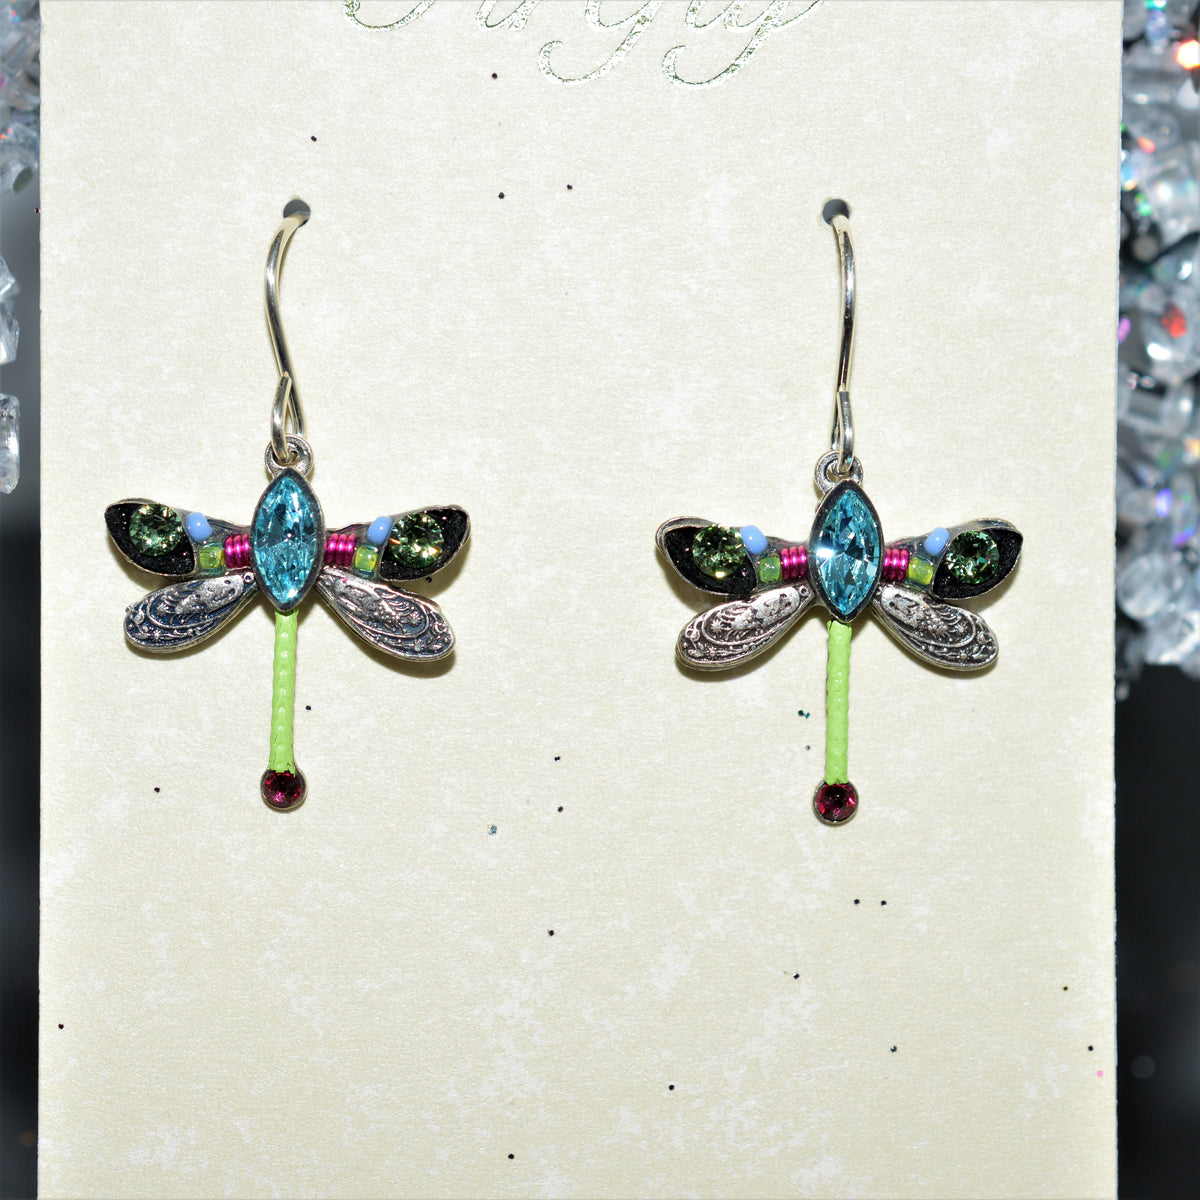 Antique Silver Plated Petite Dragonfly Earrings With Multicolor Crystals by Firefly